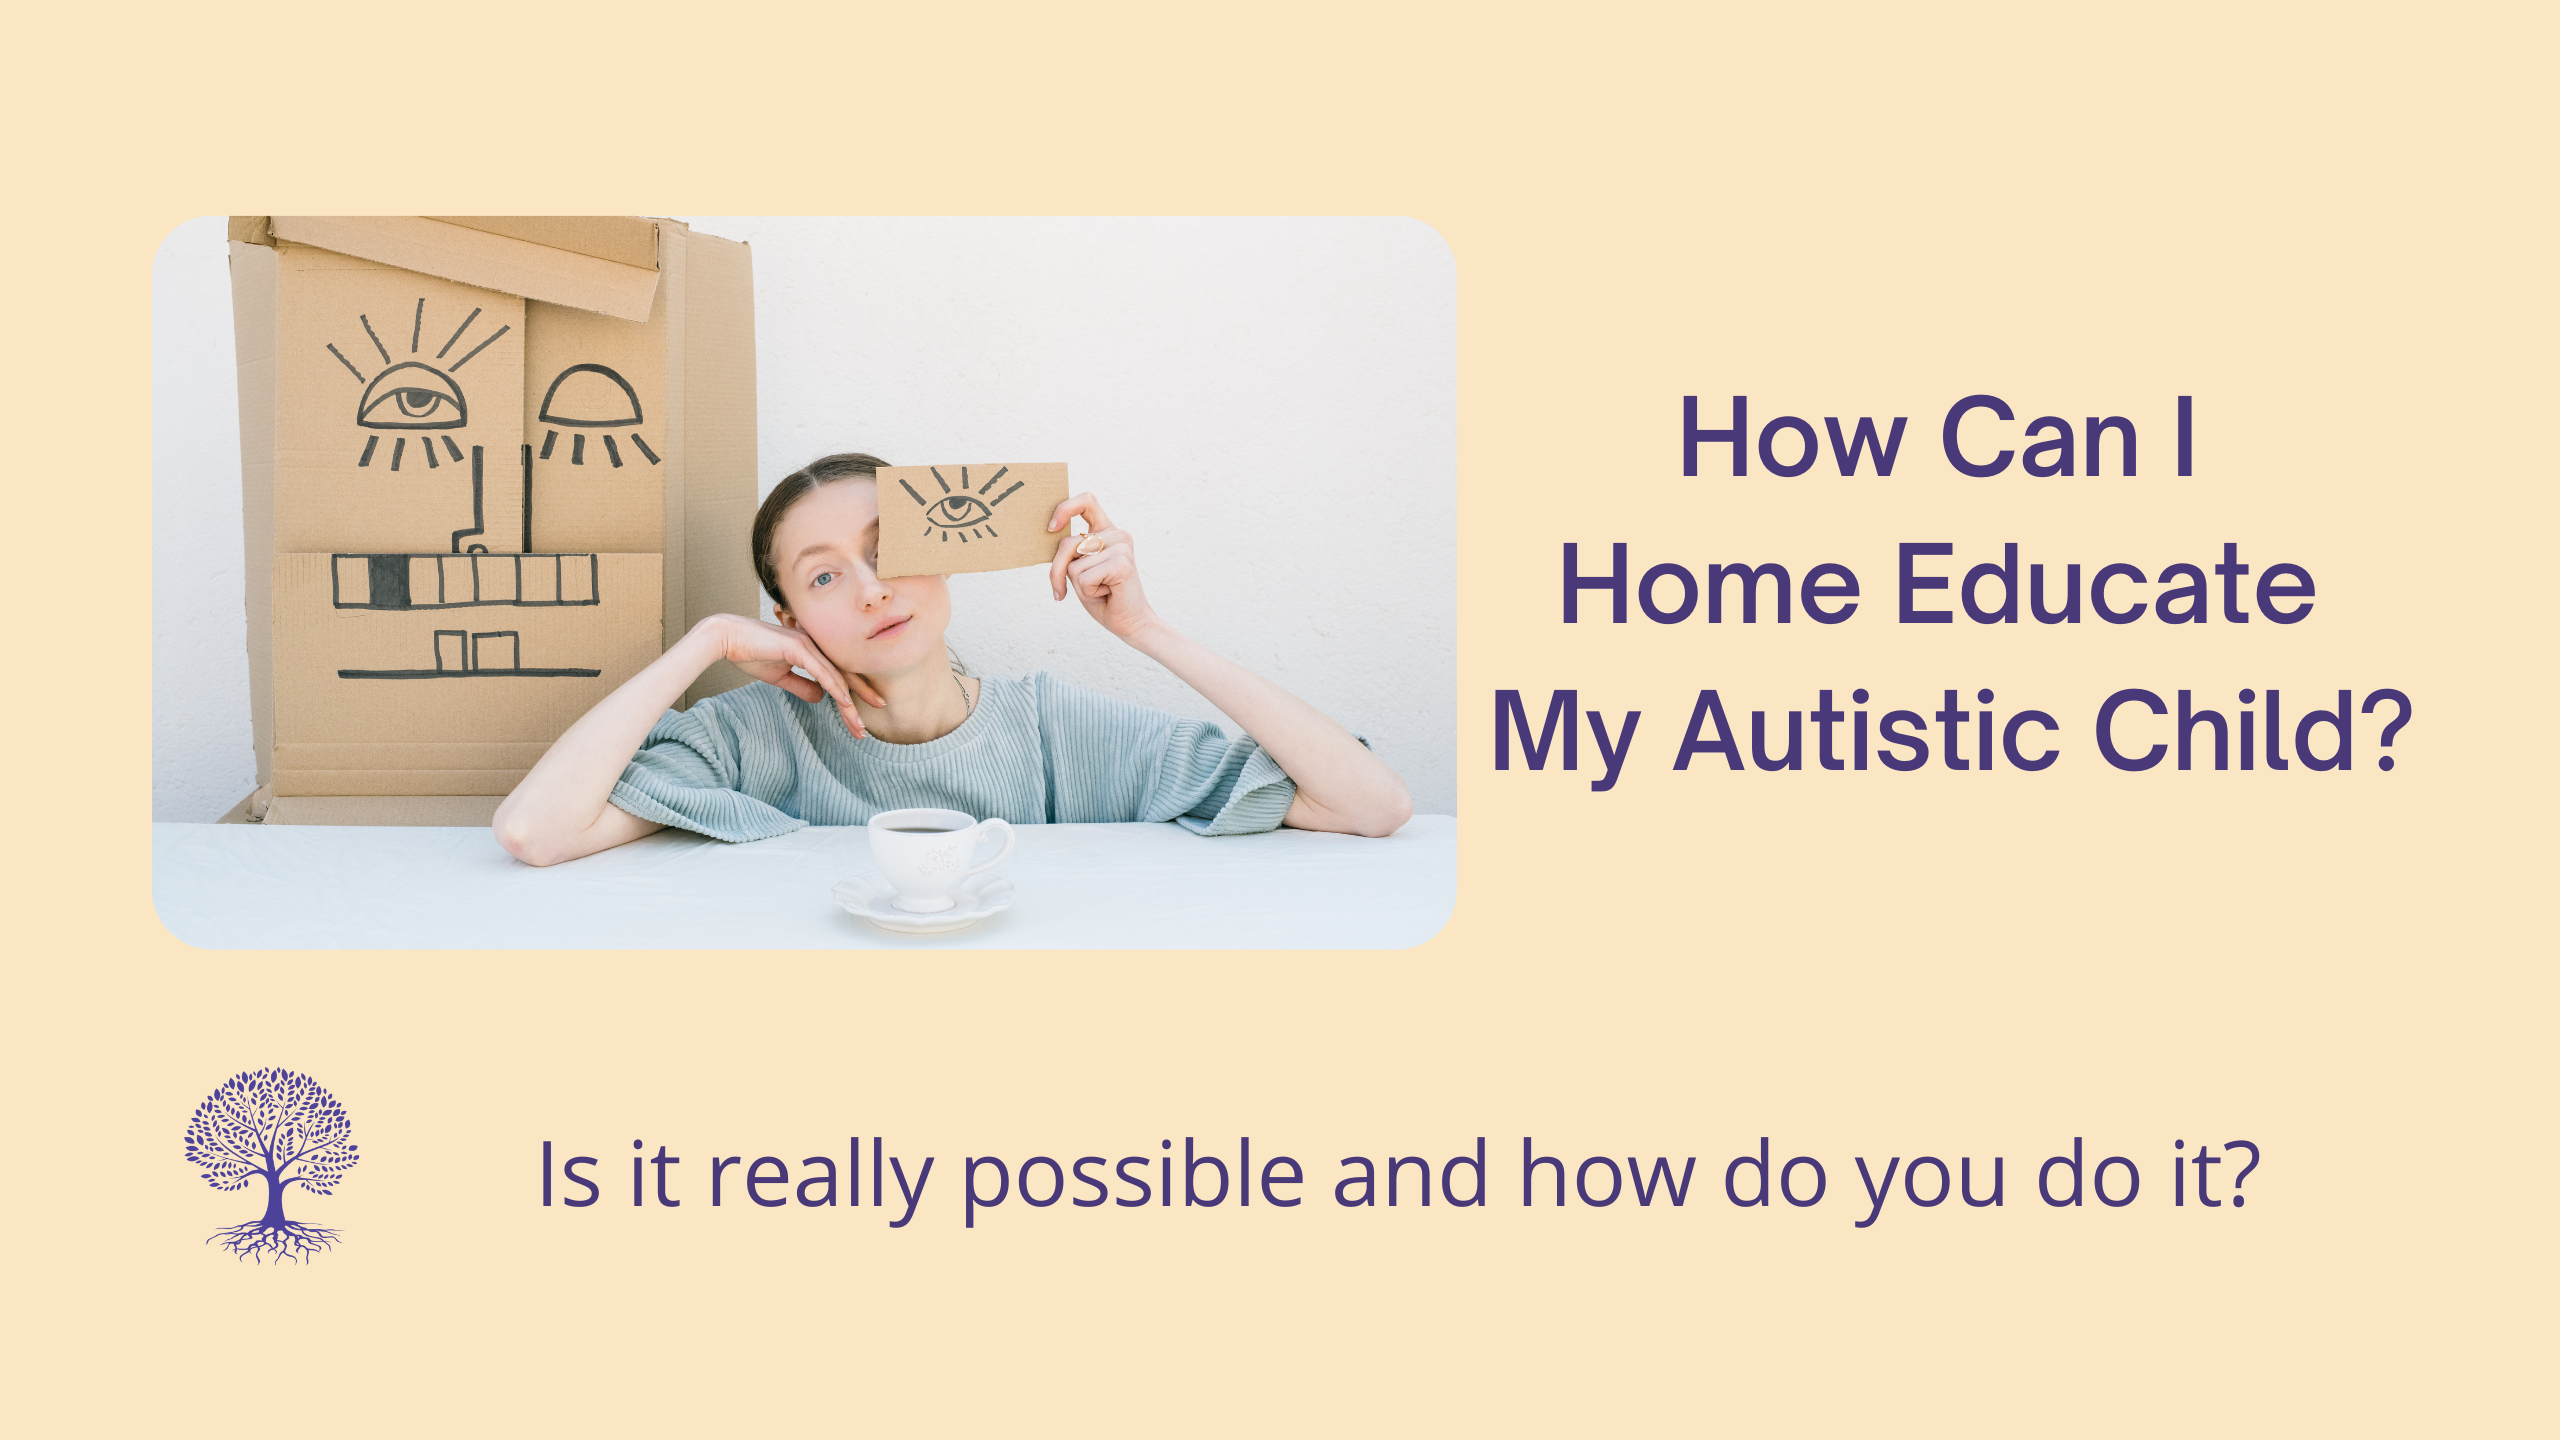 How Can I Home Educate My Autistic Child?